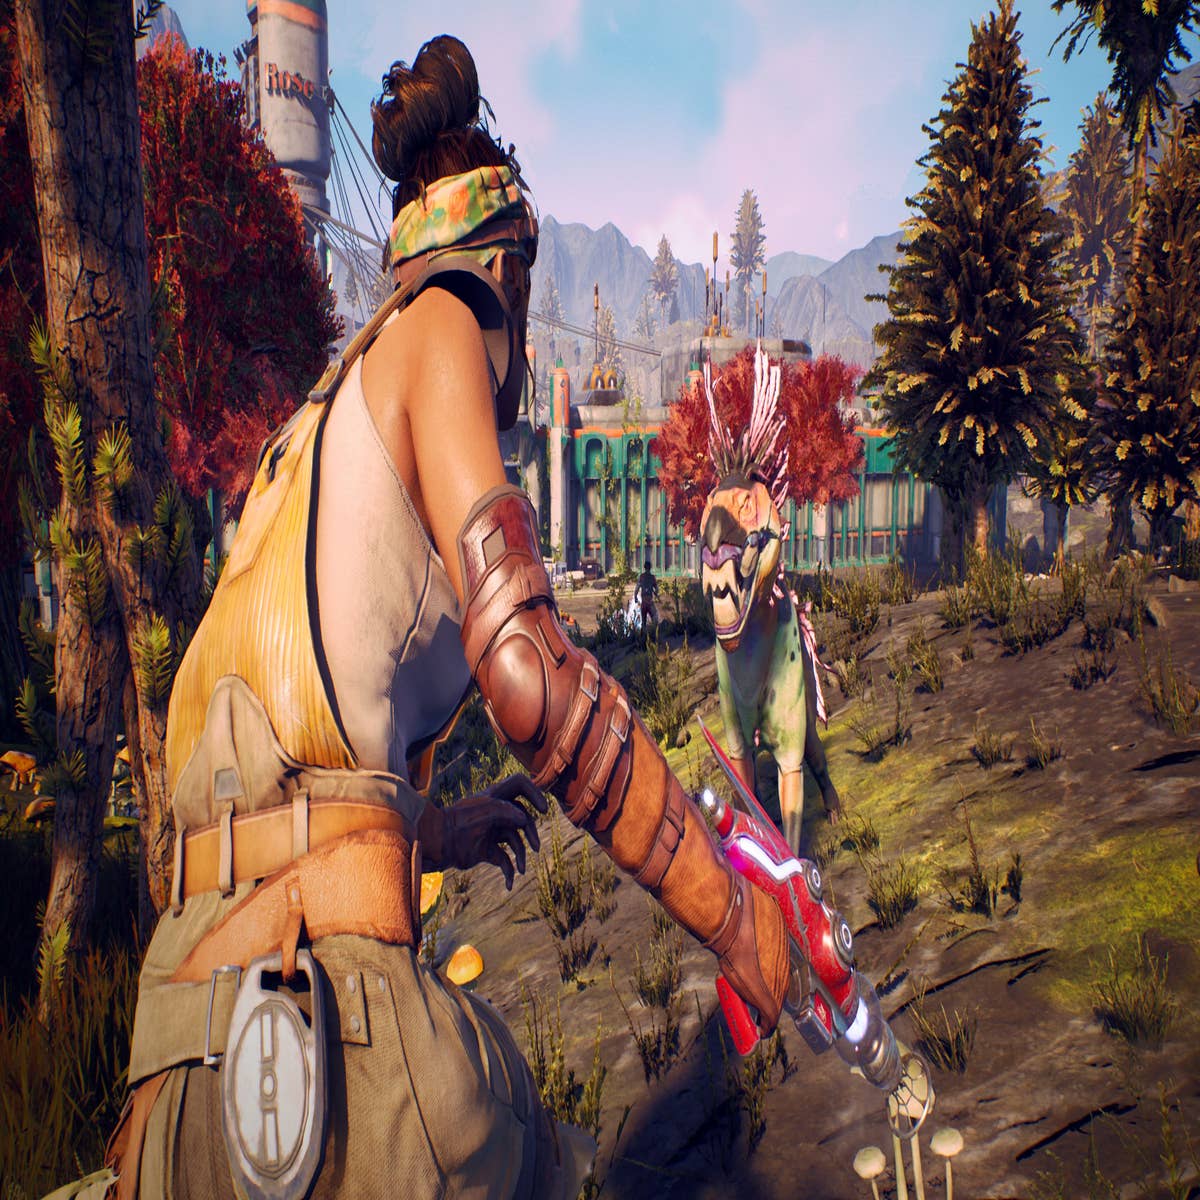 Top 10] The Outer Worlds Best Mods